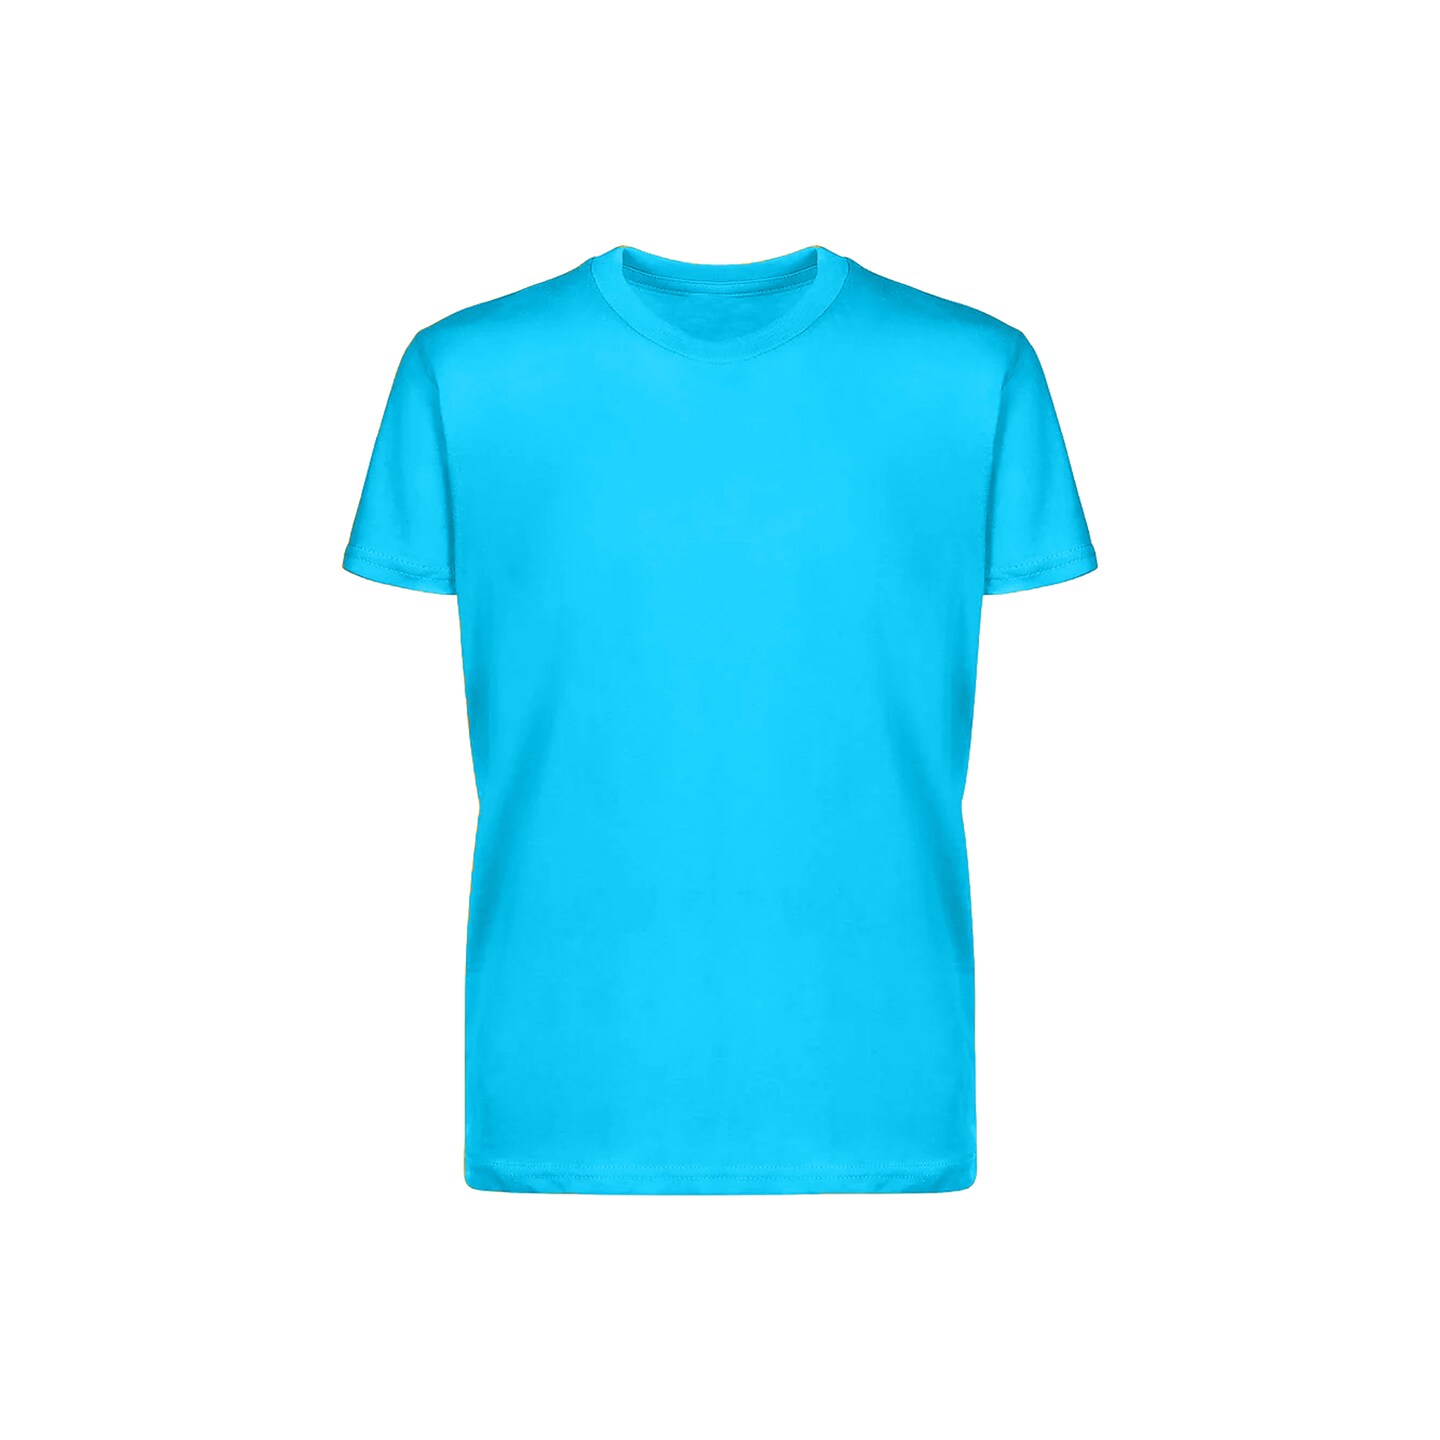 GILDAN® -Vintage Youth Premium T-Shirts - the Comfort and Style They Deserve